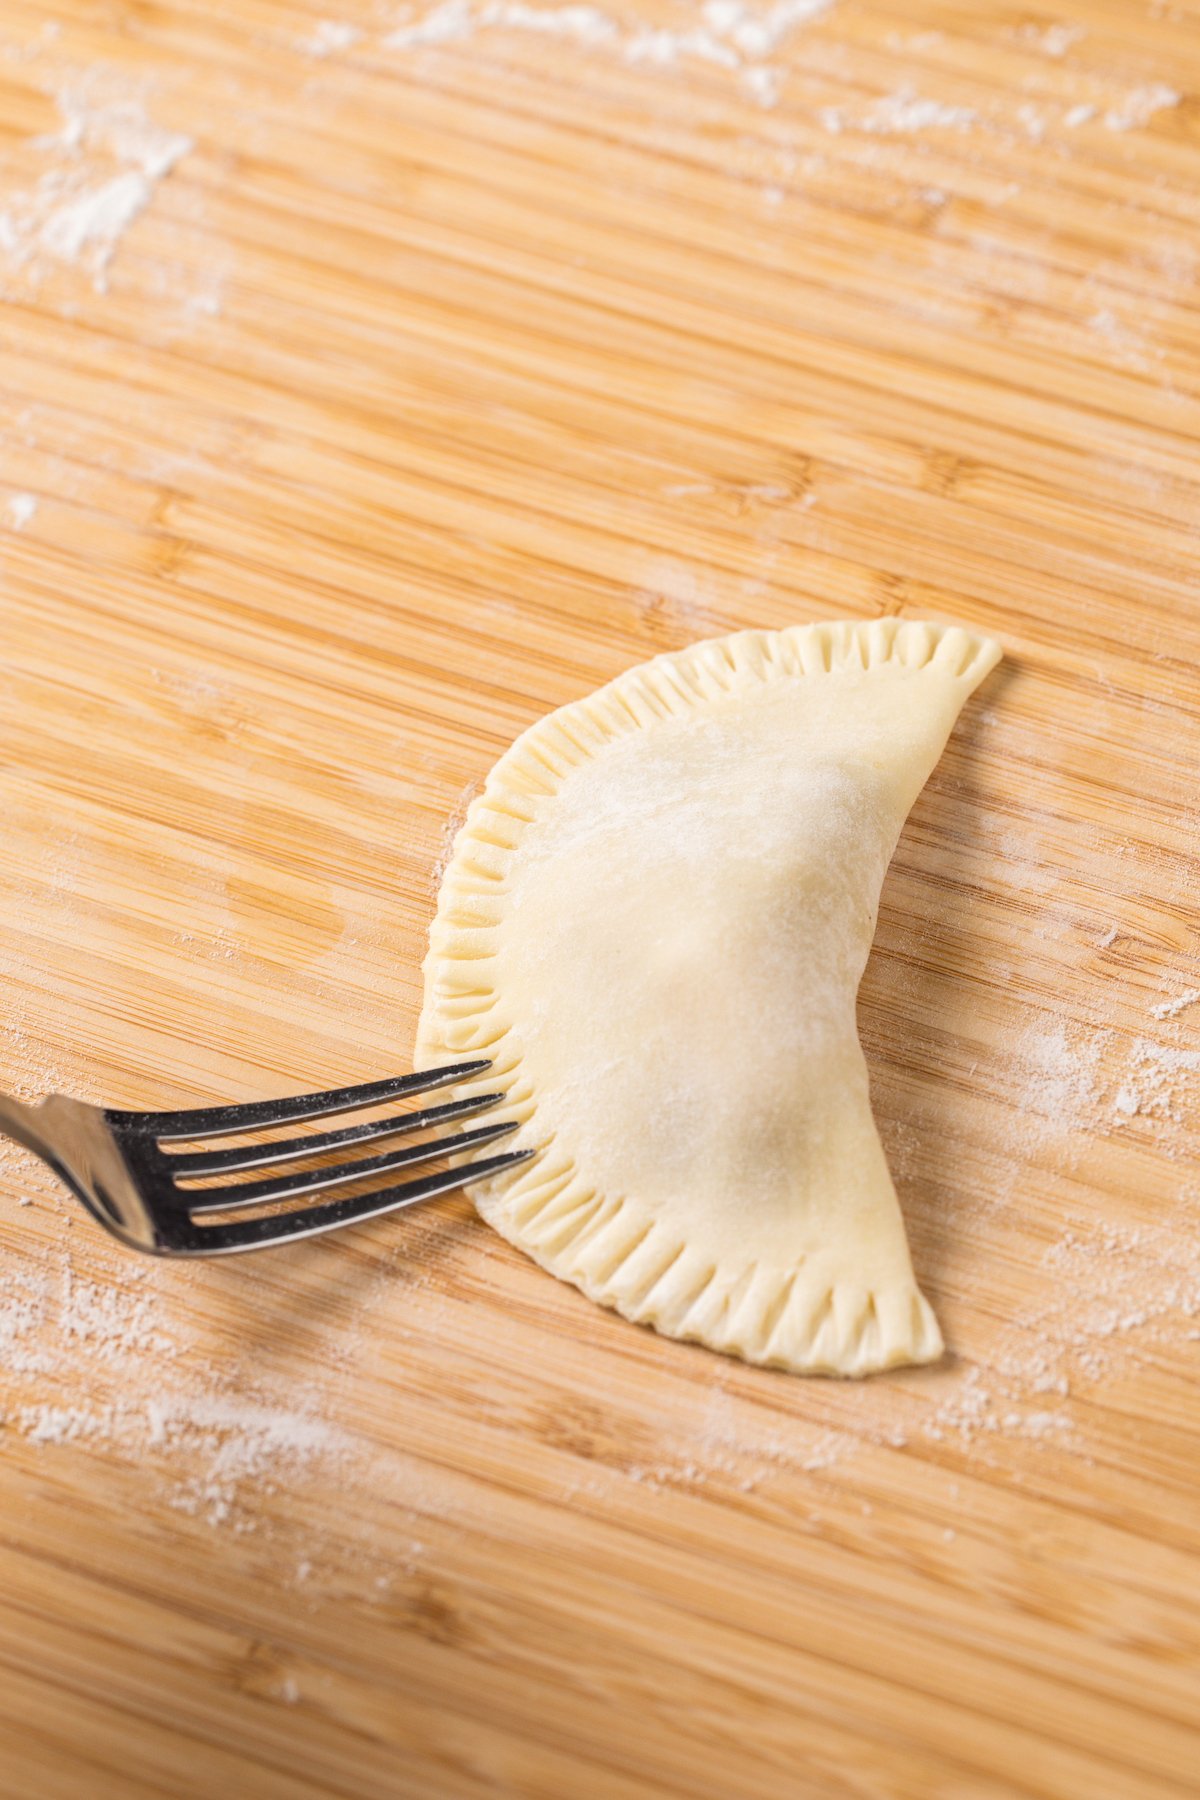 A fork pressing down on the edges of an unbaked empanada, crimping the border.